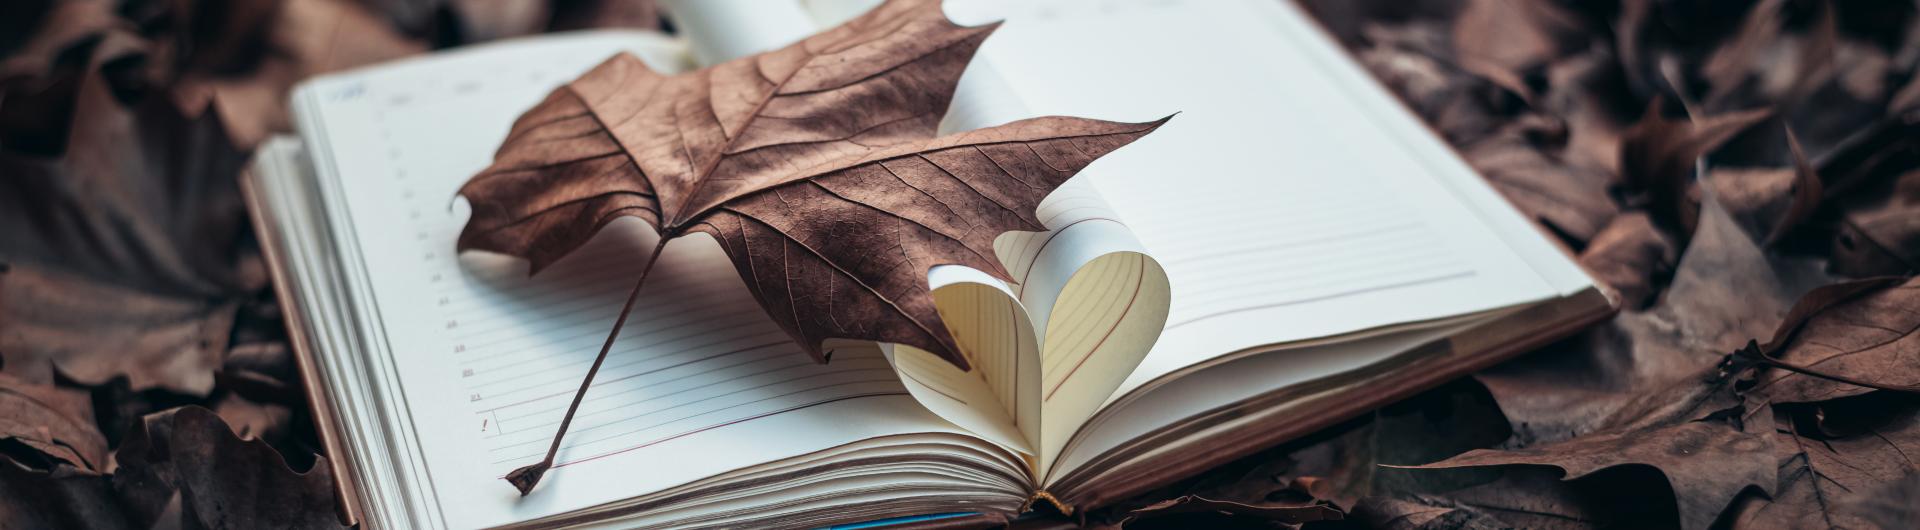 Fall leaves with a book on top